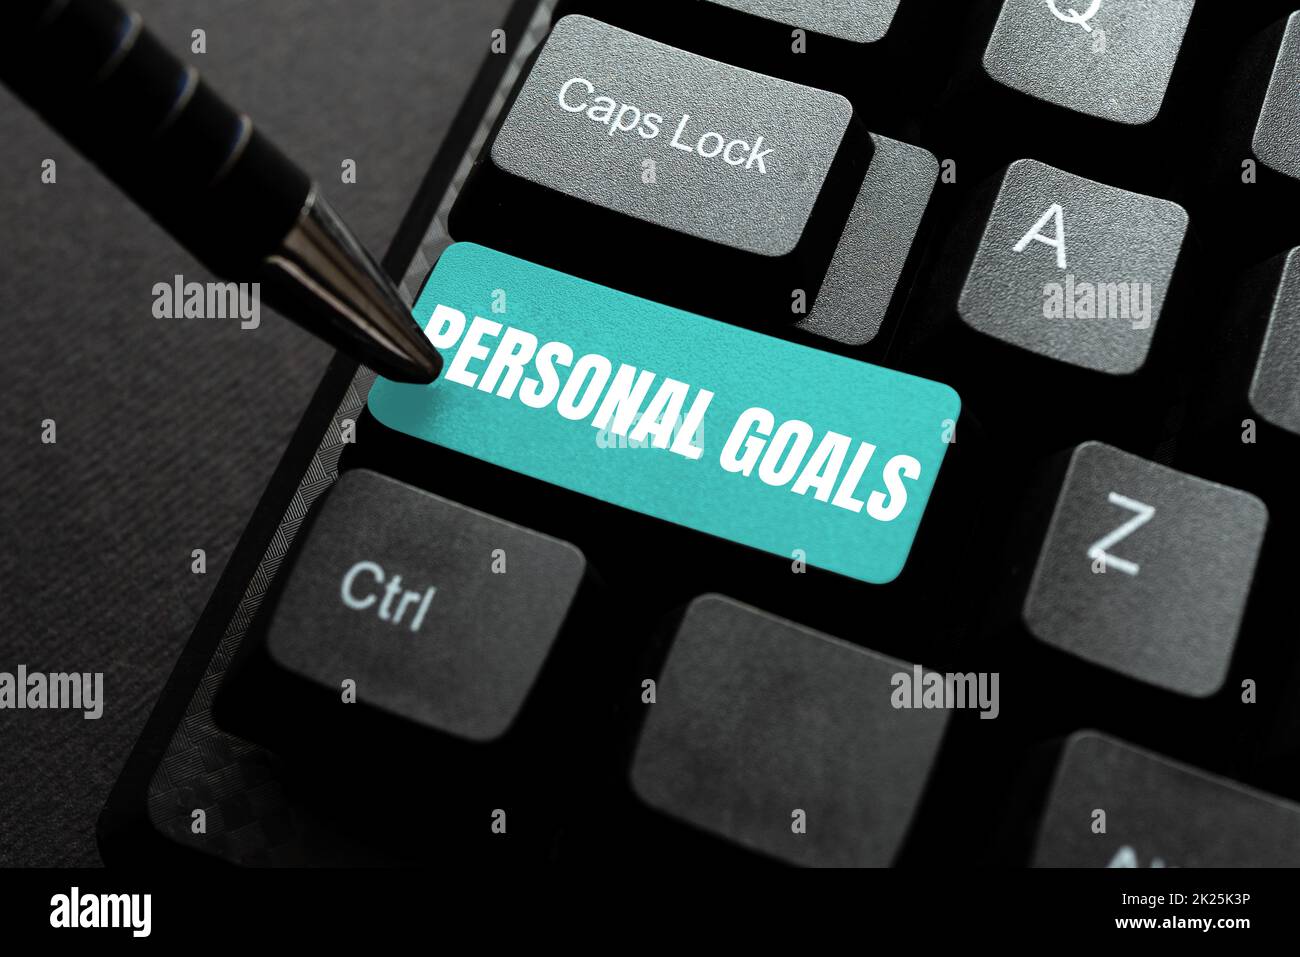 Sign displaying Personal Goals. Business concept Target set by a person to influence his efforts Motivation Abstract Sending Multiple Messages Online, Typing Group Lessons Stock Photo